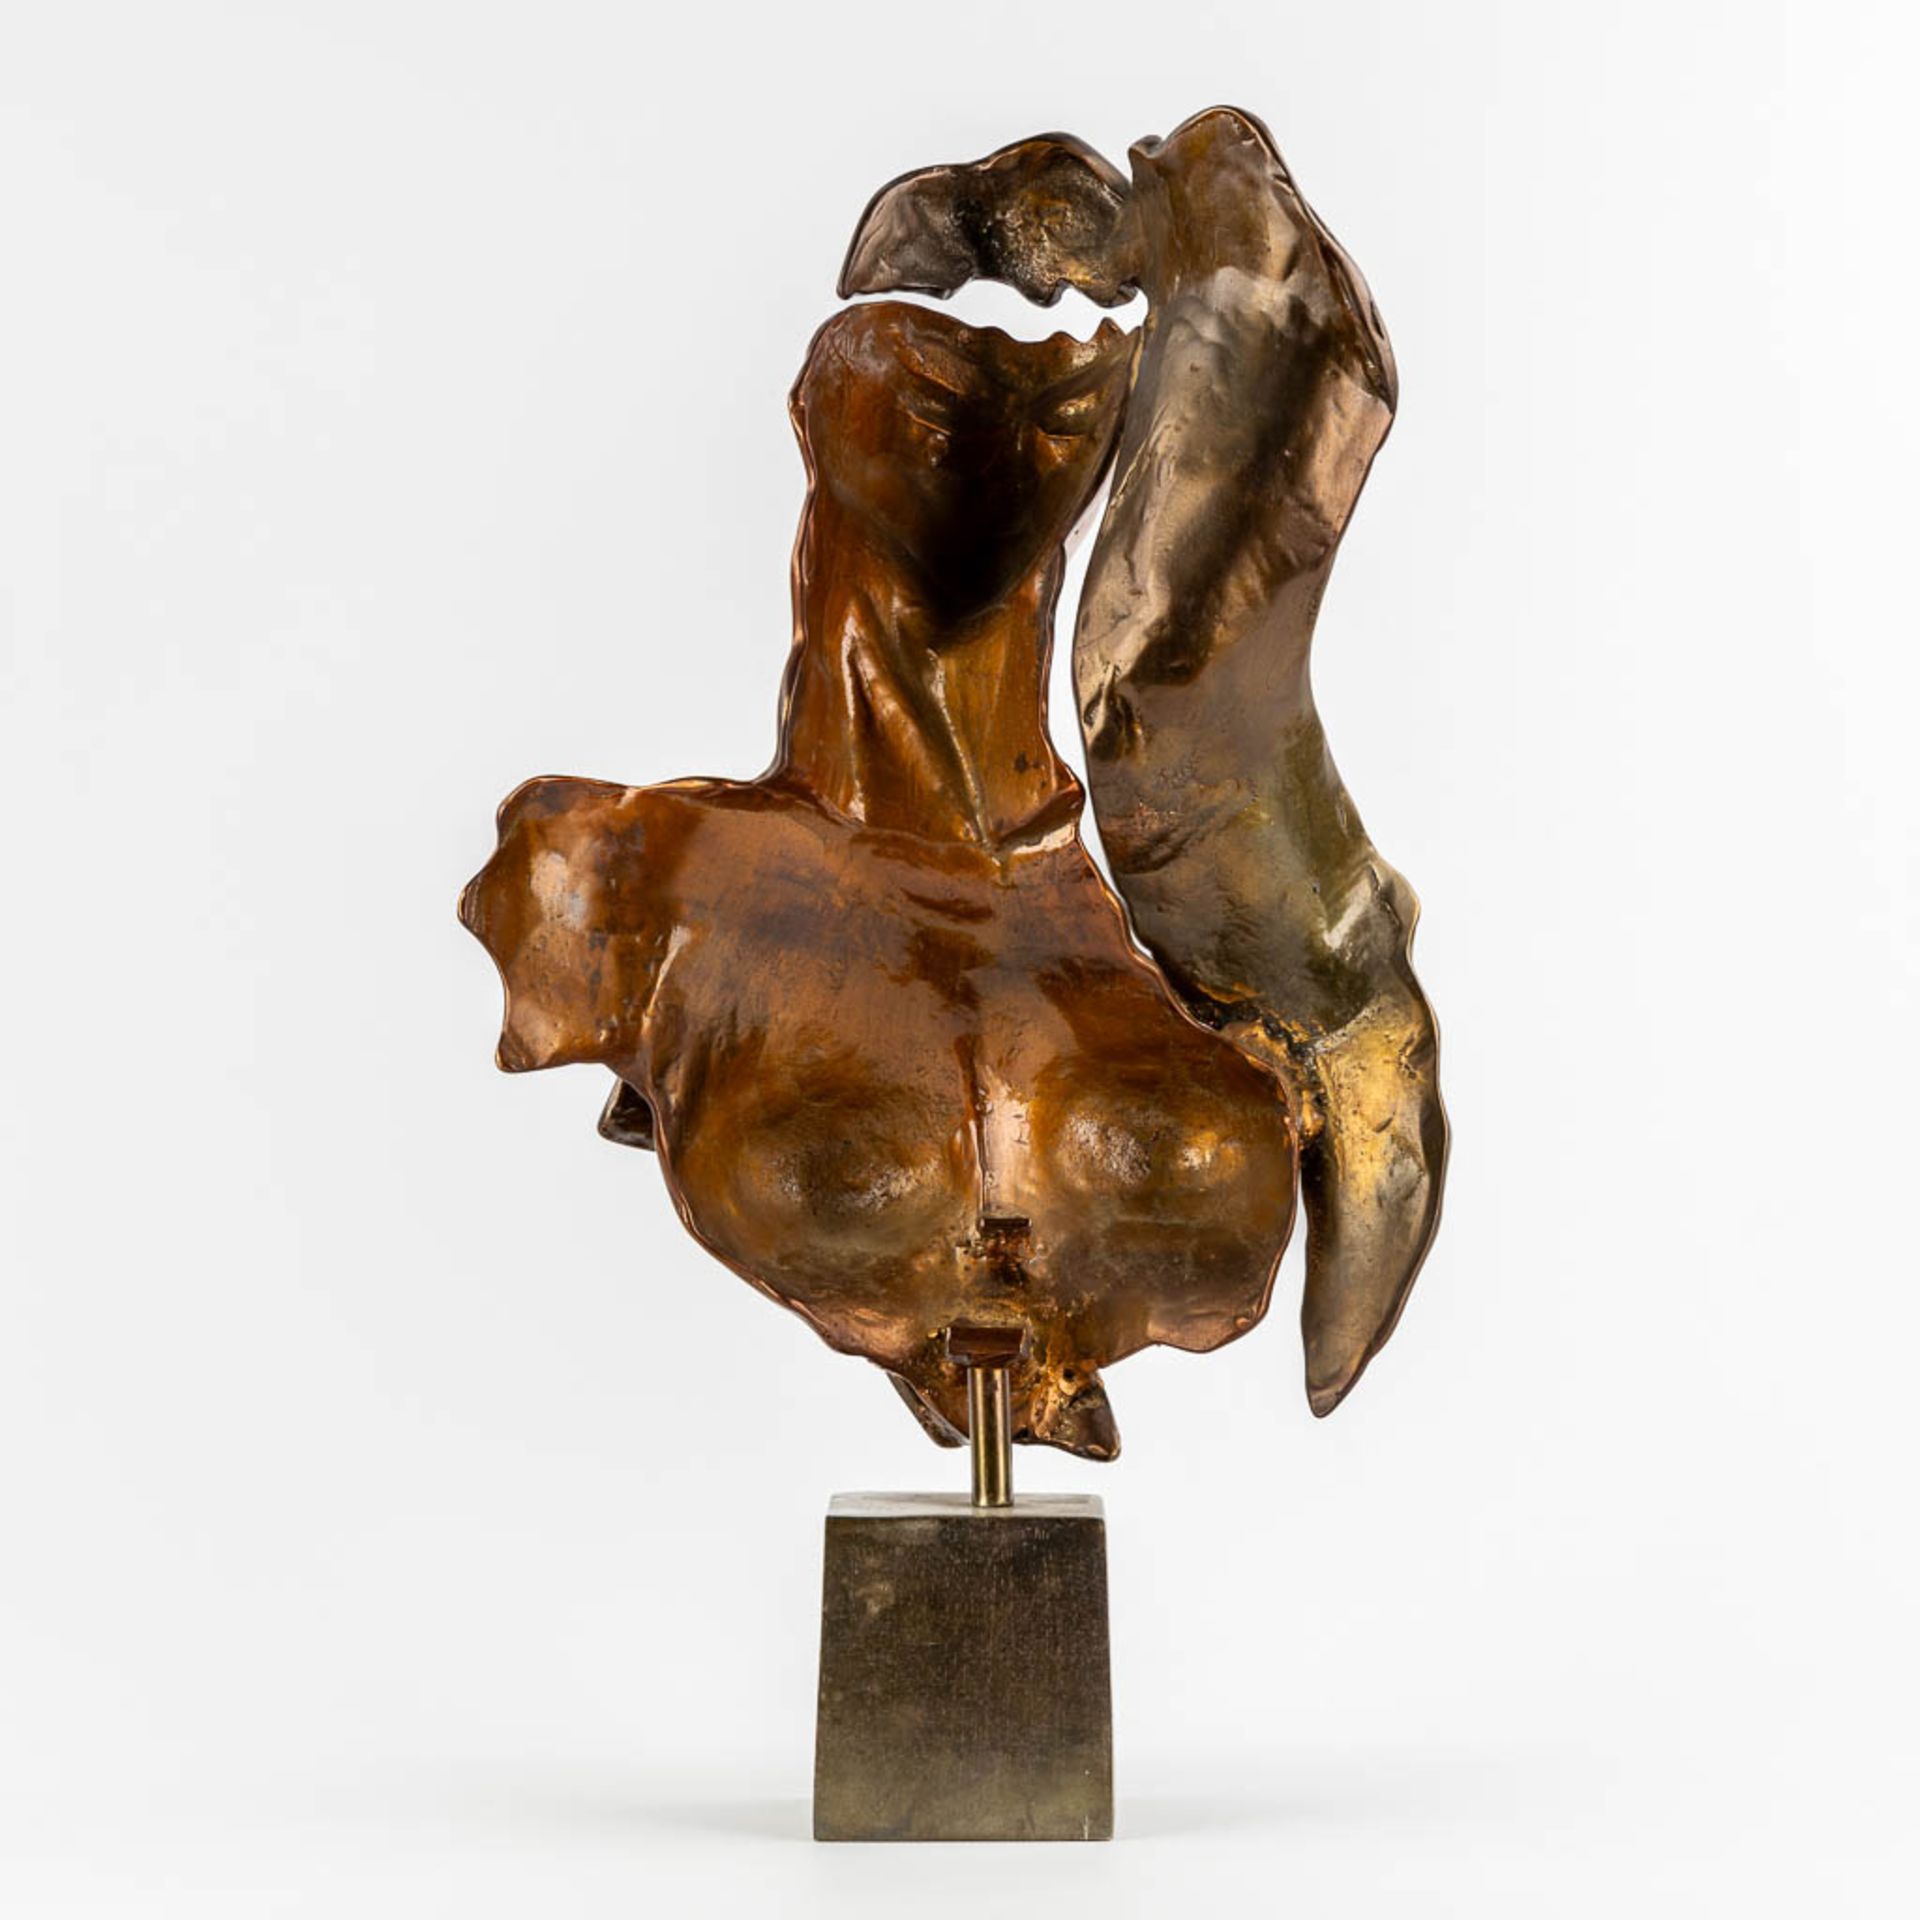 Yves LOHE (1947) 'Figure of a Lady' patinated bronze. (L:13 x W:29 x H:54 cm) - Image 5 of 10